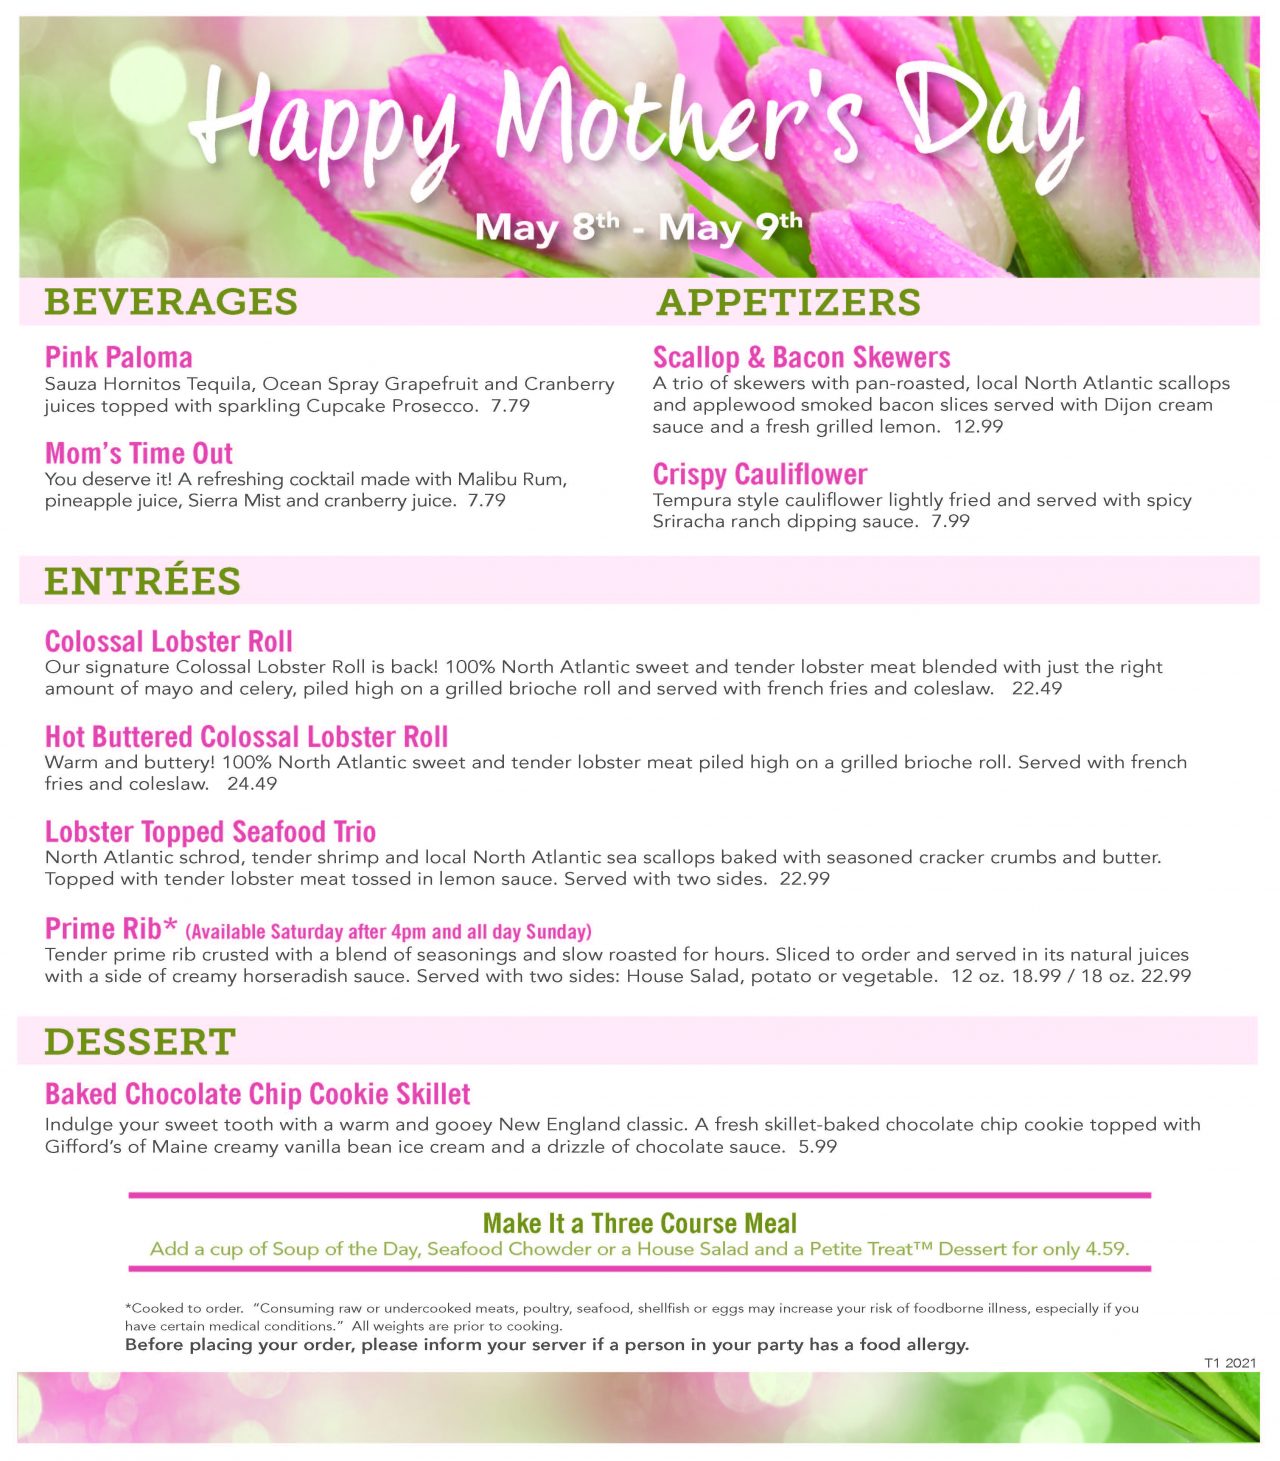 Special Mother's Day Menu at 99 Restaurant! Holyoke Mall